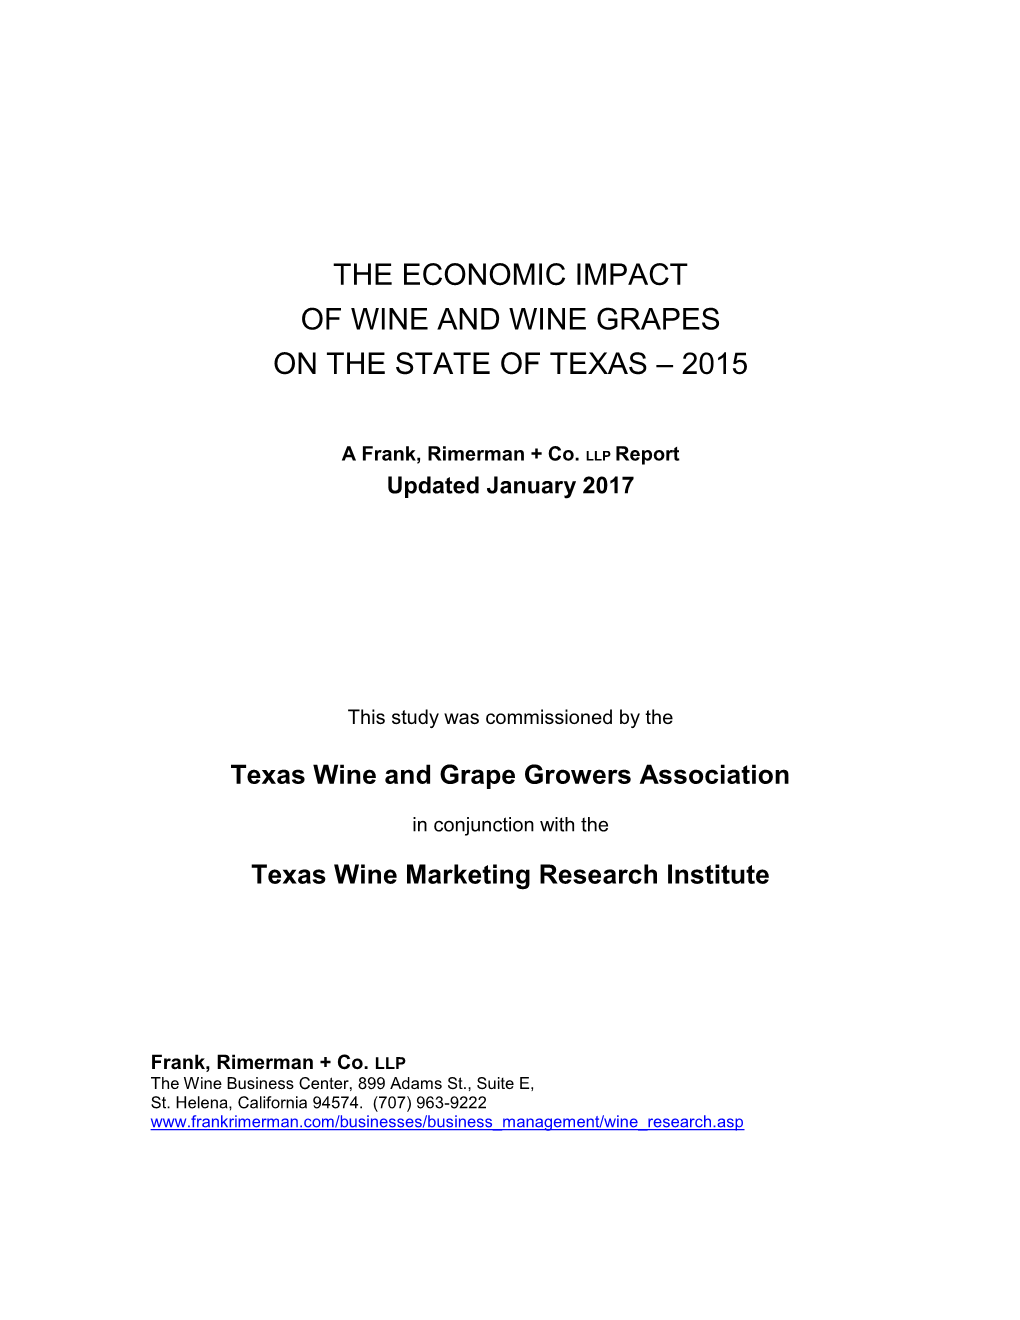 The Economic Impact of Wine and Wine Grapes on the State of Texas – 2015